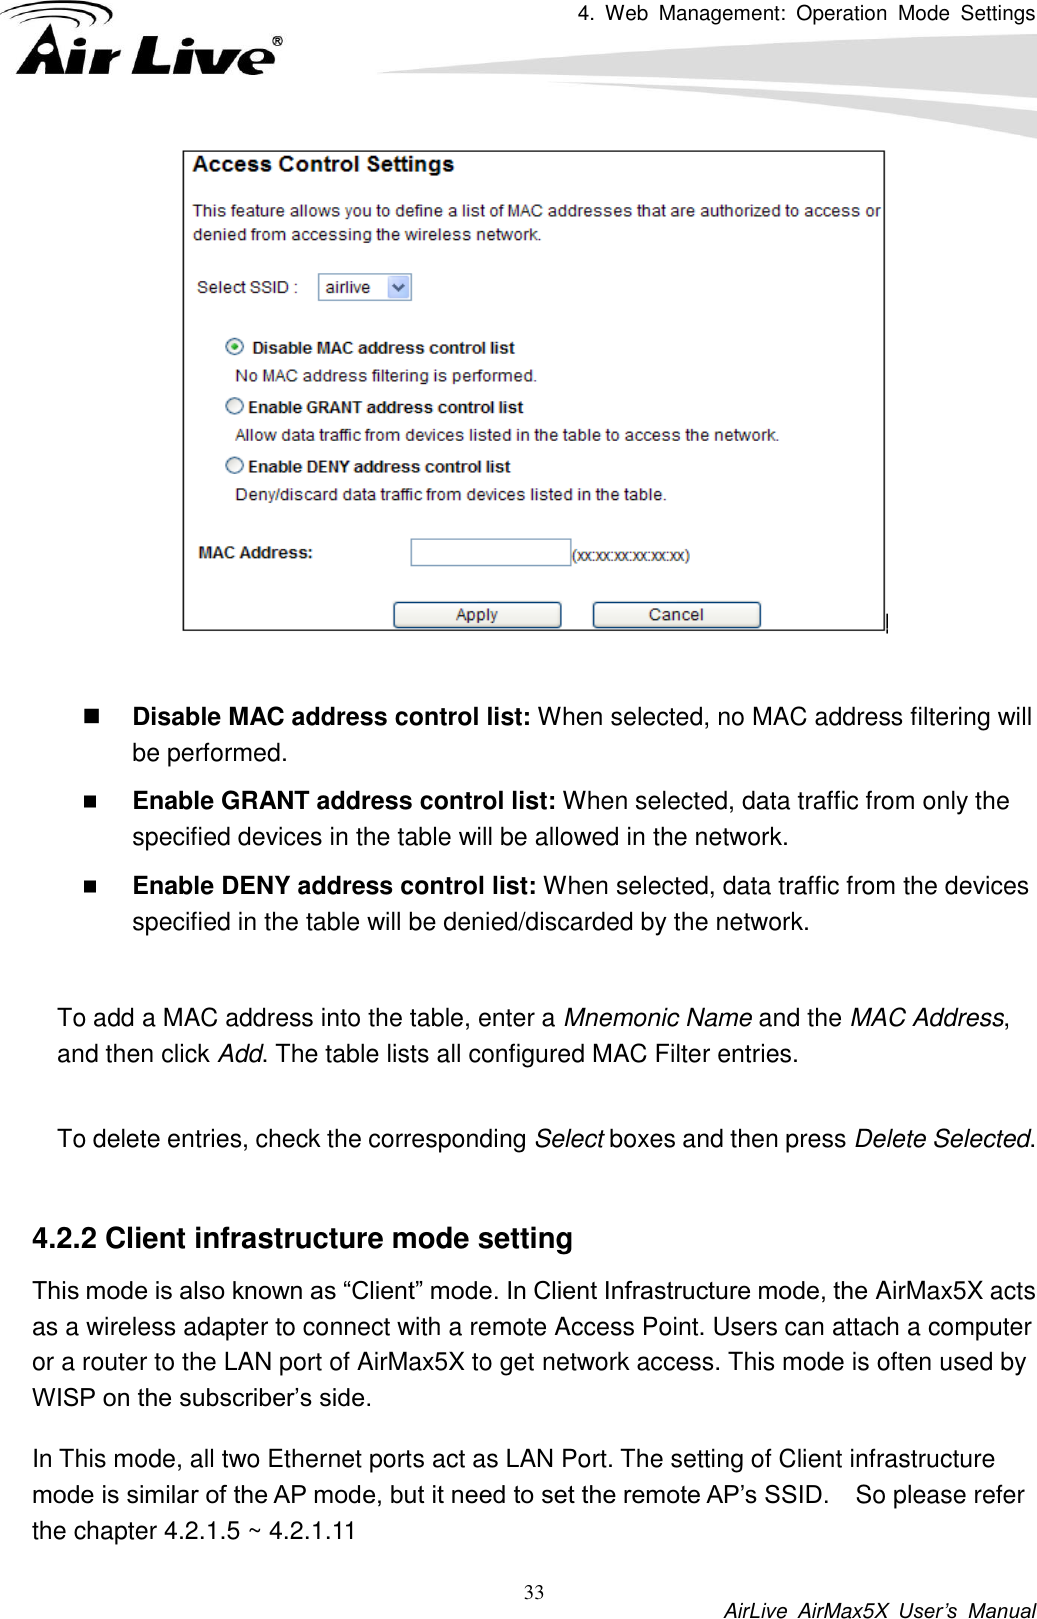 4.  Web  Management:  Operation  Mode  Settings           AirLive  AirMax5X  User’s  Manual 33    Disable MAC address control list: When selected, no MAC address filtering will be performed.    Enable GRANT address control list: When selected, data traffic from only the specified devices in the table will be allowed in the network.    Enable DENY address control list: When selected, data traffic from the devices specified in the table will be denied/discarded by the network.  To add a MAC address into the table, enter a Mnemonic Name and the MAC Address, and then click Add. The table lists all configured MAC Filter entries.    To delete entries, check the corresponding Select boxes and then press Delete Selected.  4.2.2 Client infrastructure mode setting This mode is also known as “Client” mode. In Client Infrastructure mode, the AirMax5X acts as a wireless adapter to connect with a remote Access Point. Users can attach a computer or a router to the LAN port of AirMax5X to get network access. This mode is often used by WISP on the subscriber’s side.   In This mode, all two Ethernet ports act as LAN Port. The setting of Client infrastructure mode is similar of the AP mode, but it need to set the remote AP’s SSID.    So please refer the chapter 4.2.1.5 ~ 4.2.1.11 